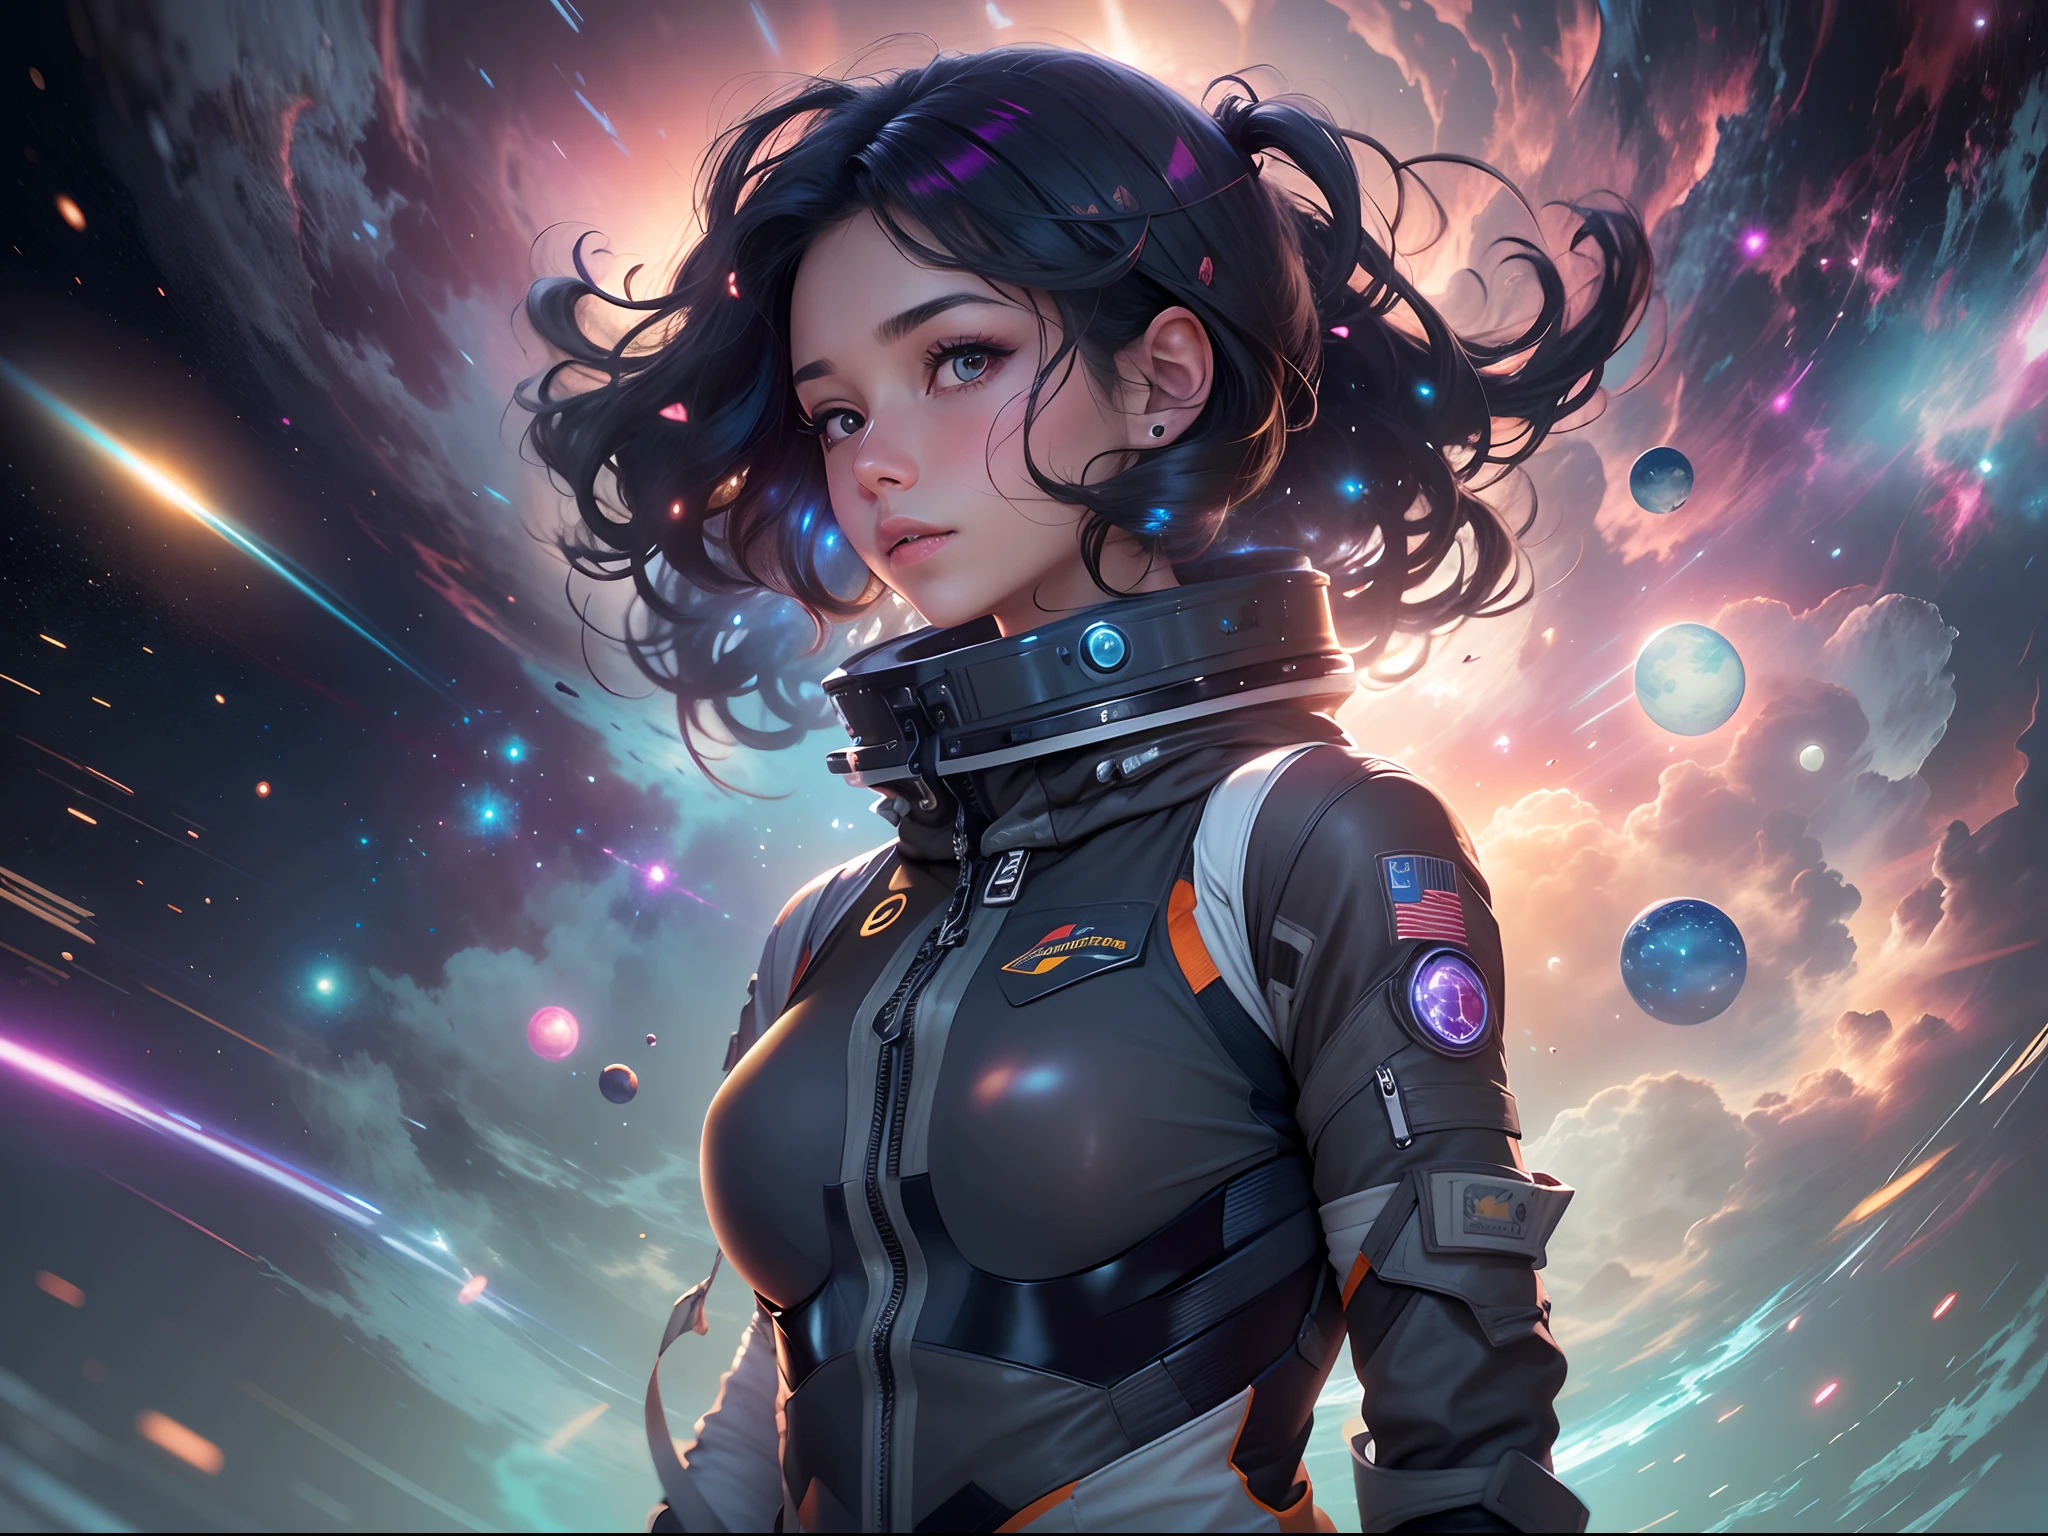 The girl with the pretty face floats in space, portrait of a black-haired young woman in zero gravity, the backdrop of the milky way and a supermassive black hole as background，Wearing high-tech tight spacesuits, There's a huge black hole forming behind it, and the stars behind her swim past ，The girl with the beautiful face stood in the center of the planet, and countless golden meteors converged on her.LightPainting, holographic，Center symmetrical composition，Axisymmetric composition，realistic，skin textures，anatomy correct